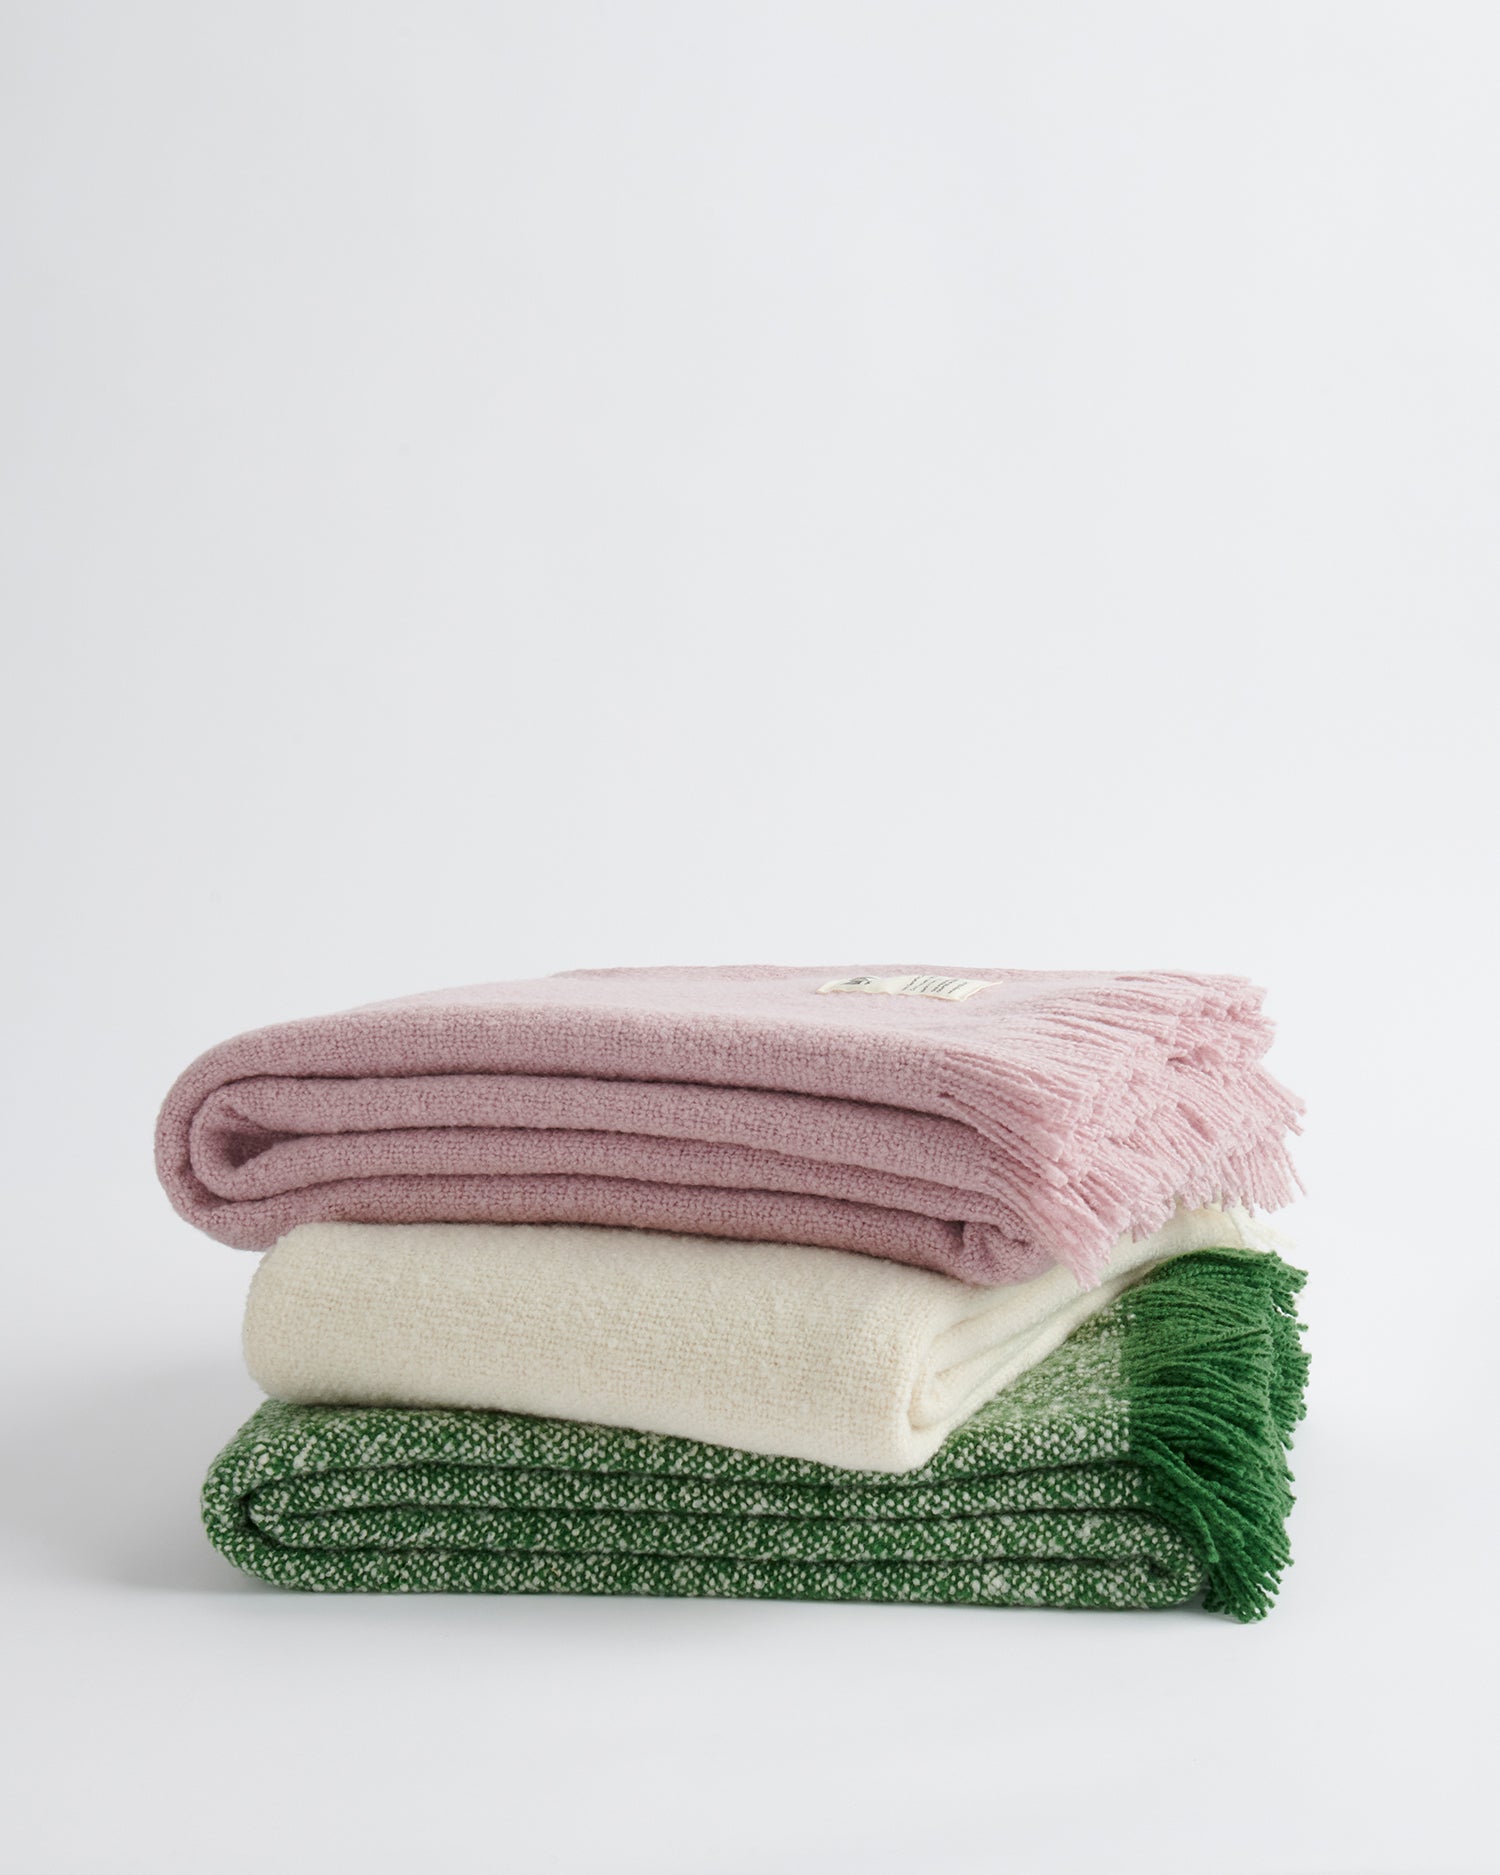 A stack of three cooper's cormo throws, one in each colour.